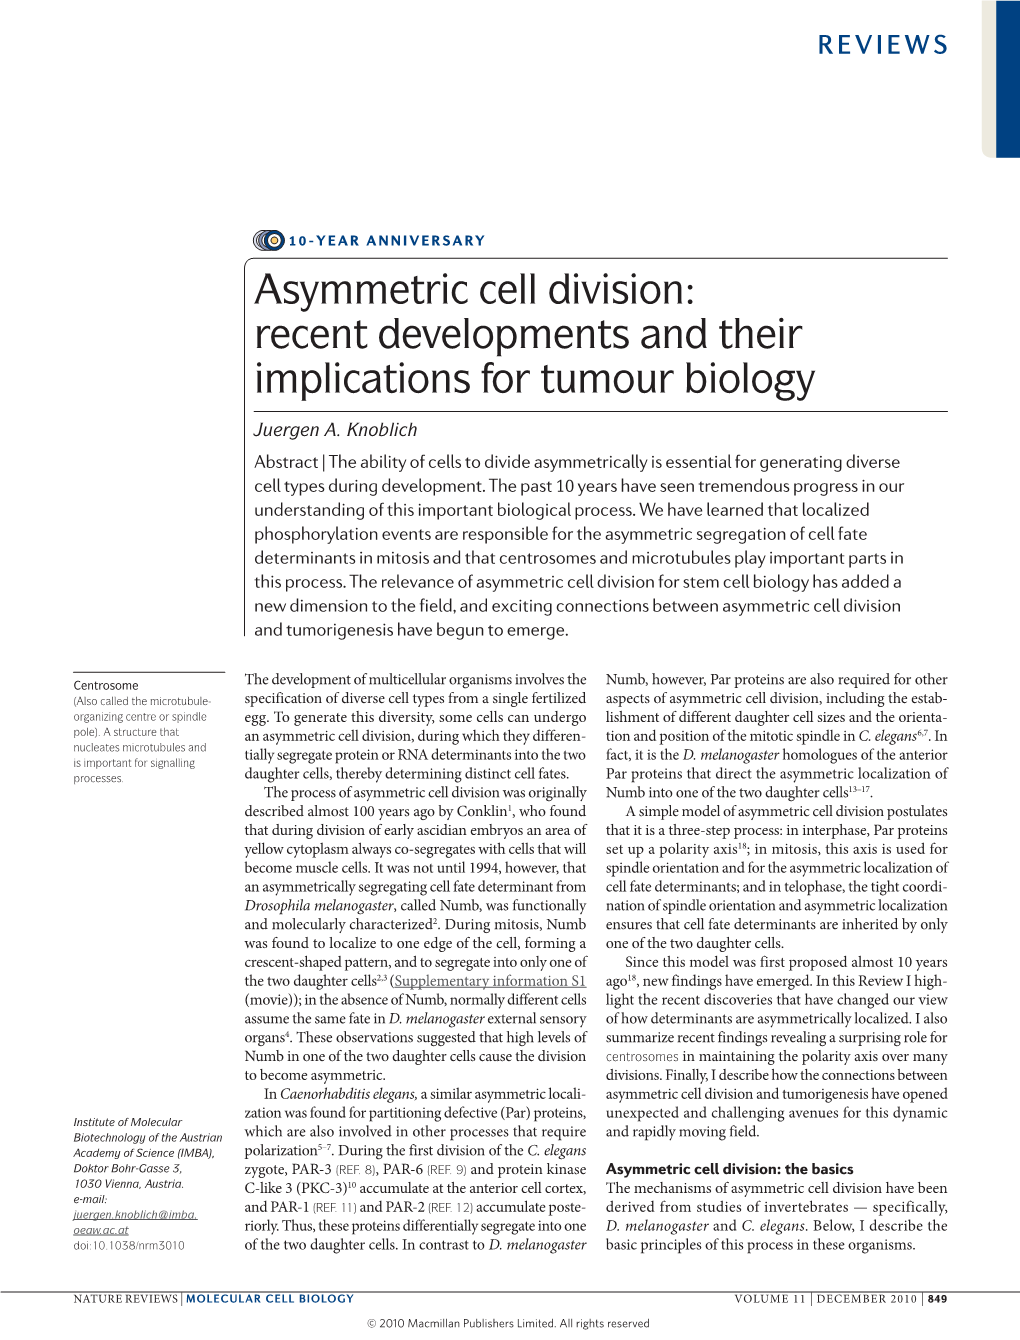 Asymmetric Cell Division: Recent Developments and Their Implications for Tumour Biology